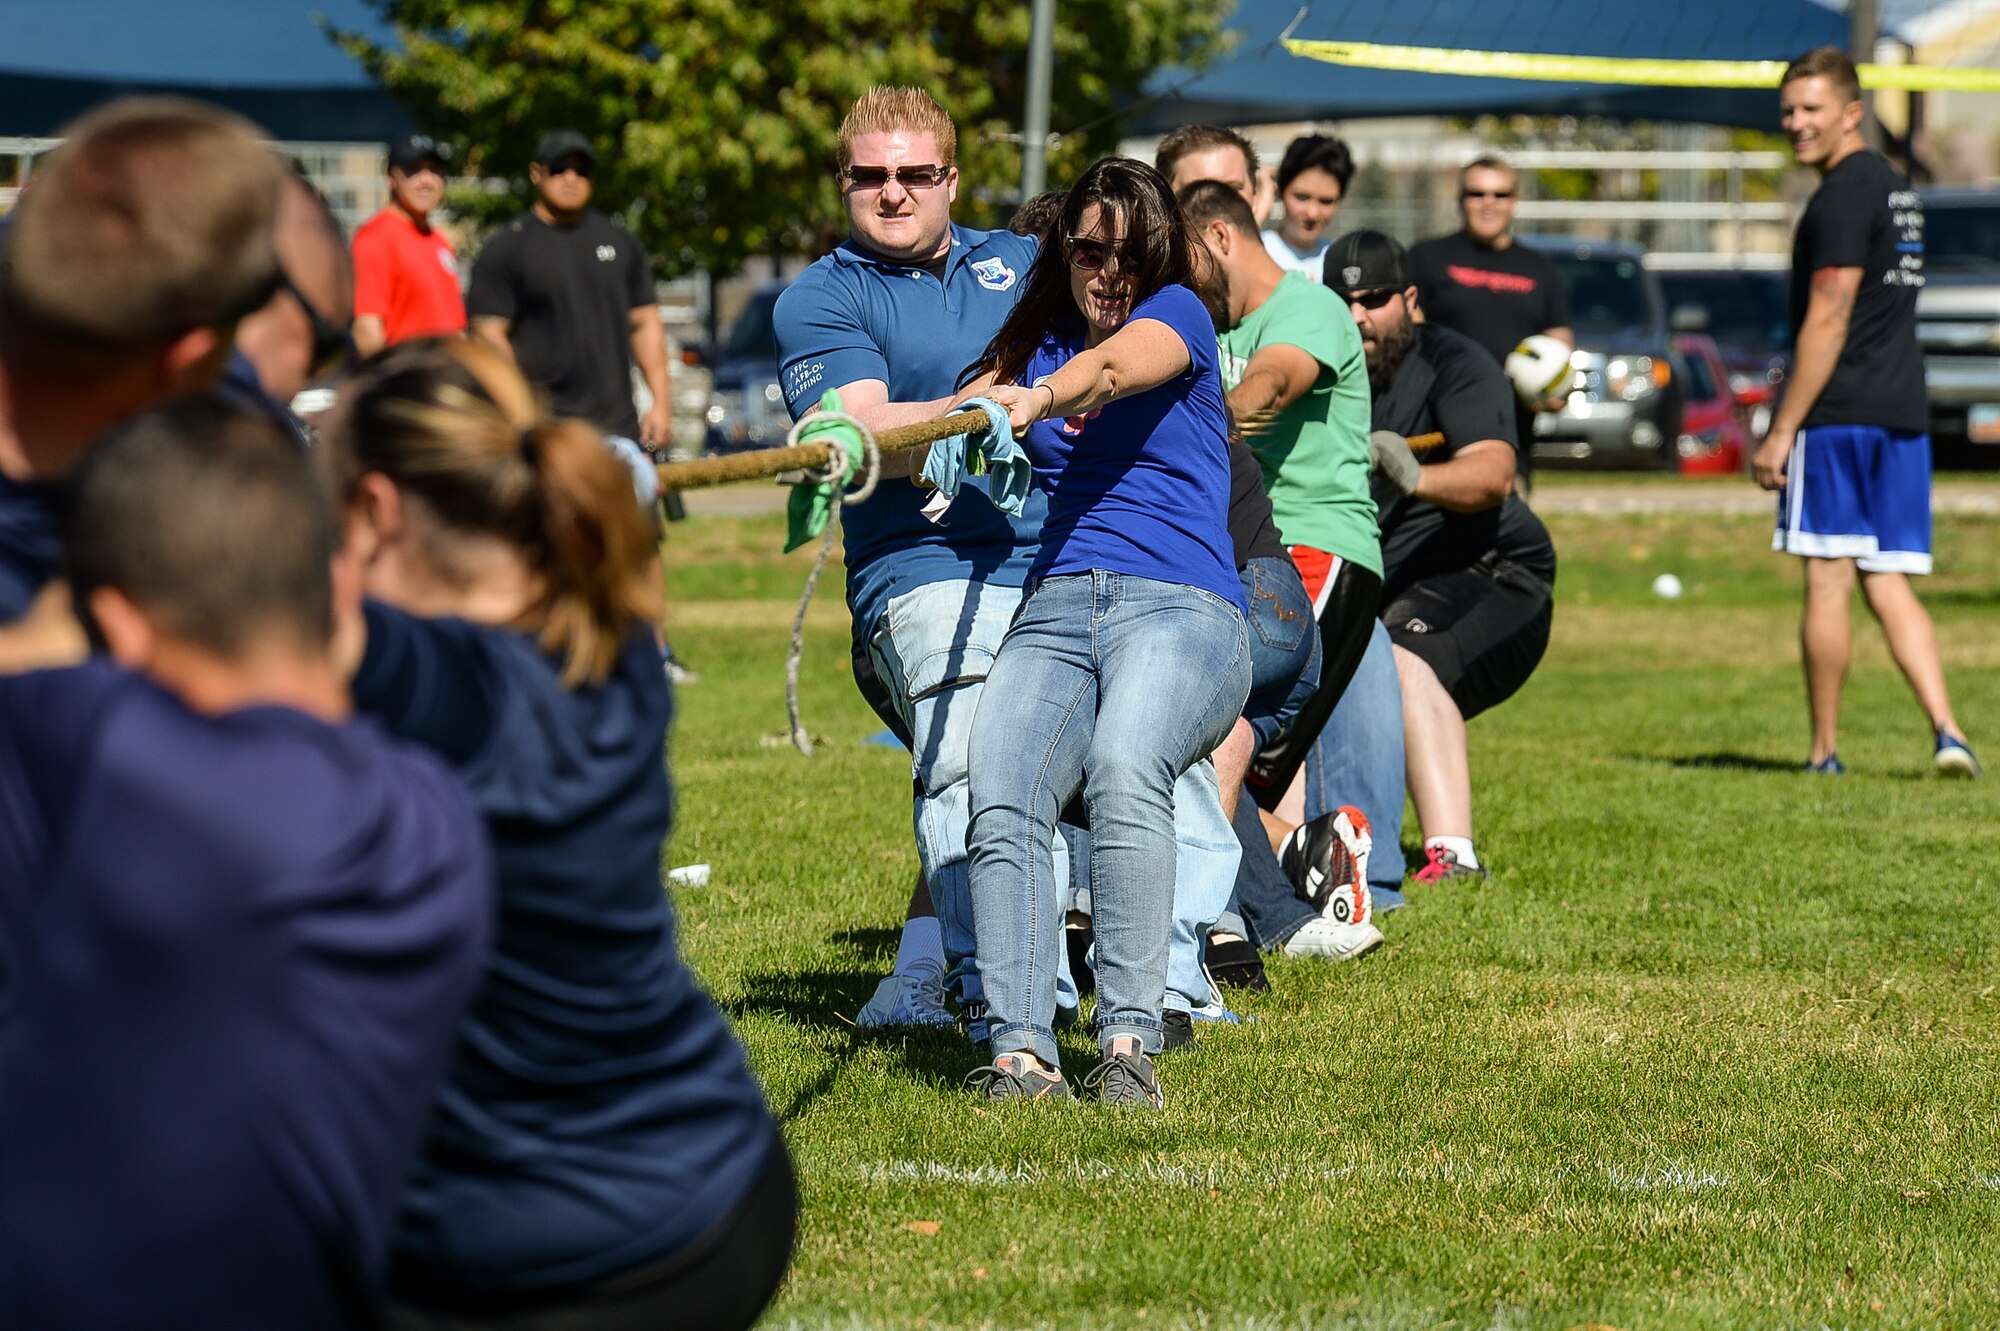 Team Hill personnel participate in a tug-of-war contest during Wingman Day Sept. 30 at Hill Air Force Base. The base’s community support coordinator and 75th Force Support Squadron, in conjunction with mission partners, coordinated a schedule of events which included unit resiliency training, lunch, basewide fitness events and team competitions, and an awards ceremony. (U.S. Air Force by R. Nial Bradshaw)